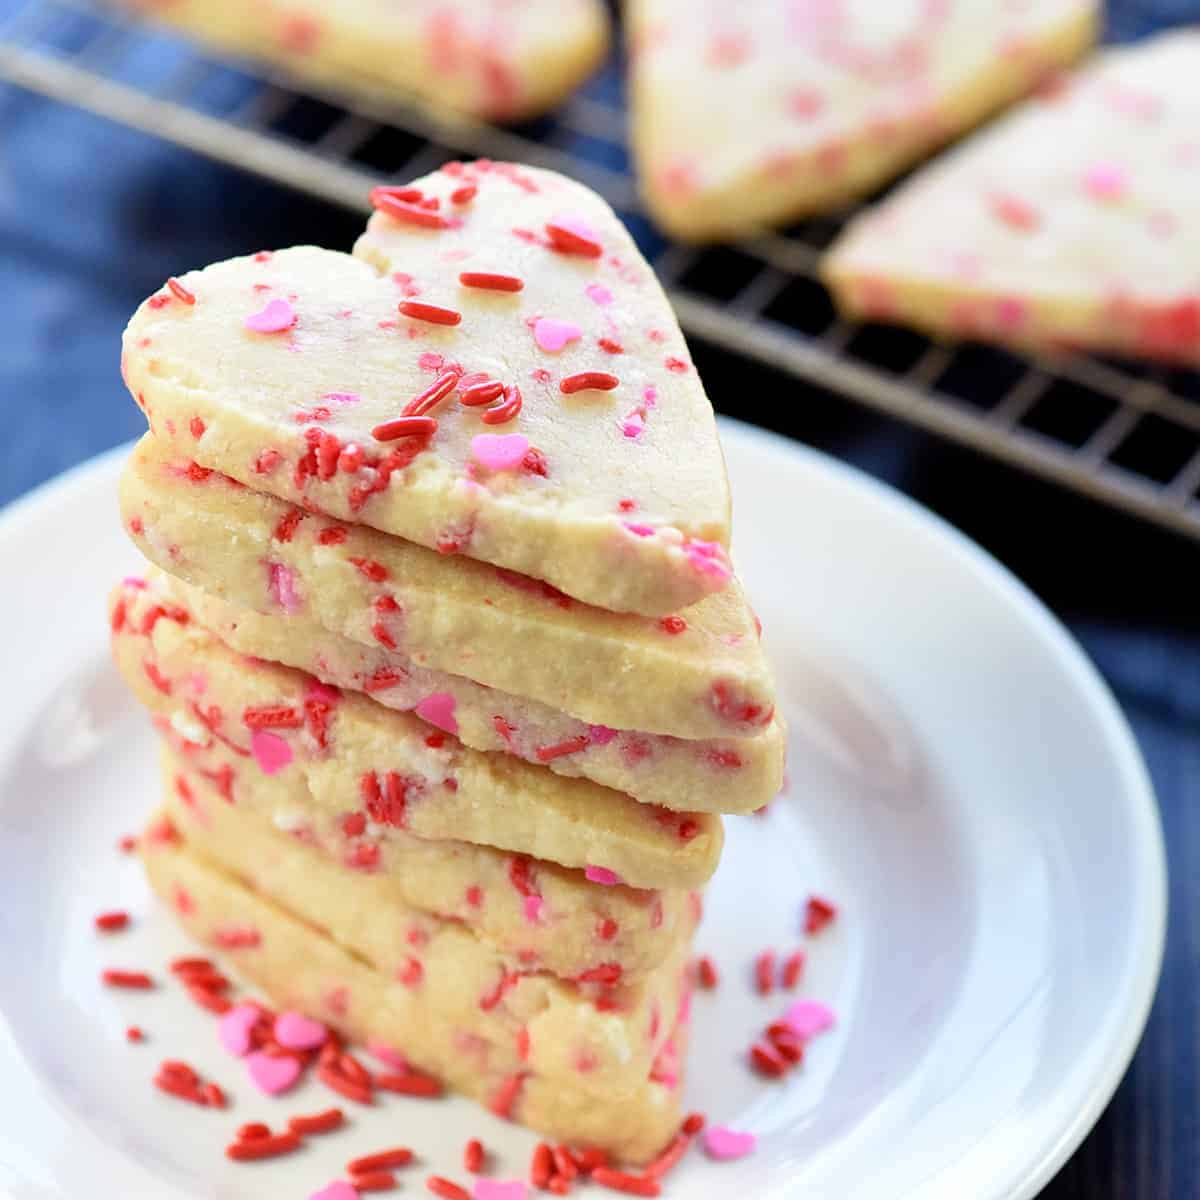 https://www.fivehearthome.com/wp-content/uploads/2021/02/Easy-Shortbread-Heart-Shaped-Cookes-Recipe_1200pxSquare.jpg